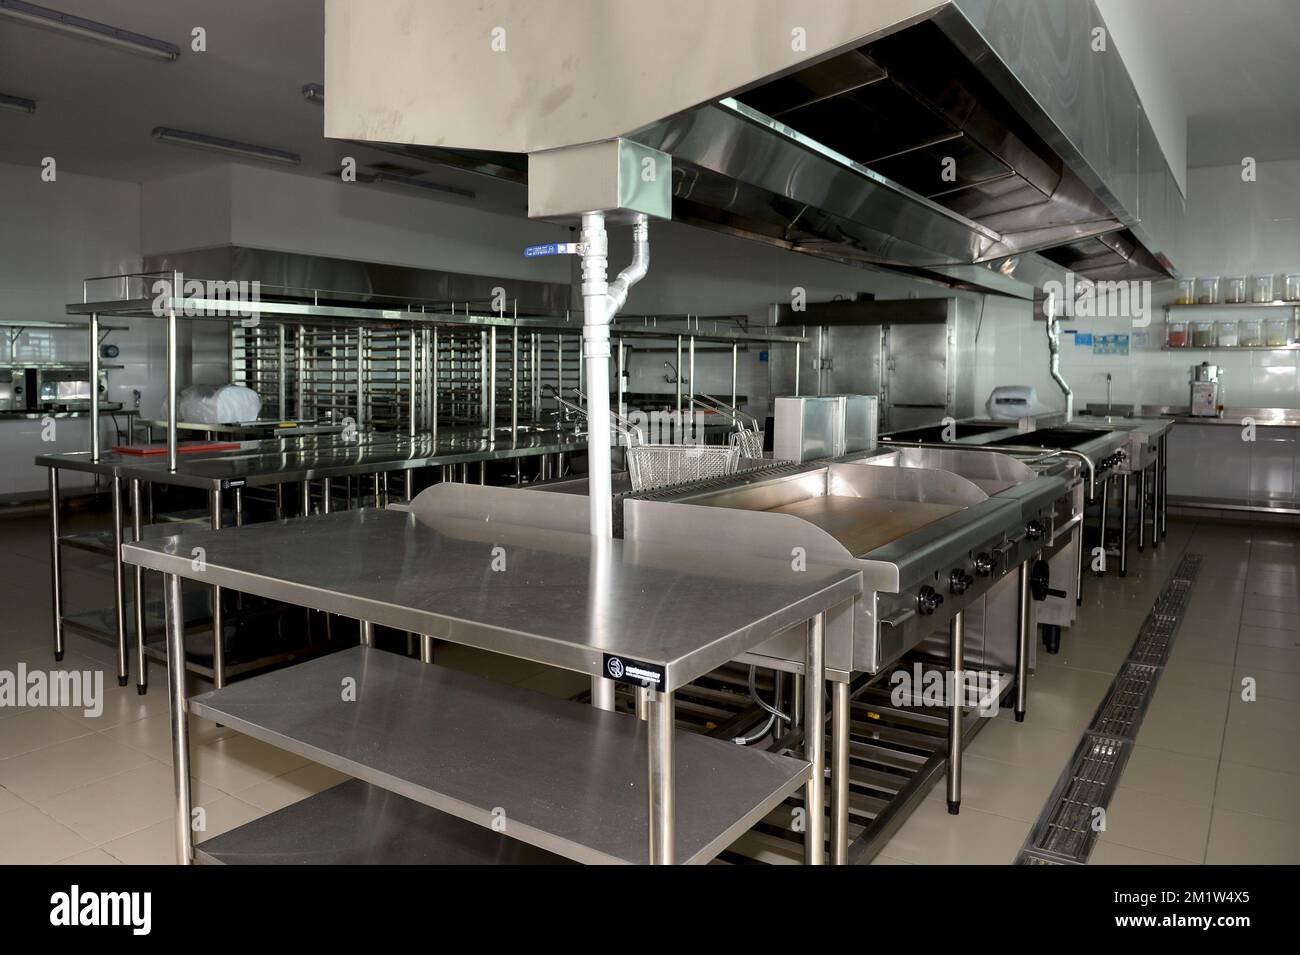 20140609 - MOGI DAS CRUZES, BRAZIL: Illustration picture shows the new kitchen at the Paradise Golf and Lake resort where Belgian national soccer team Red Devils will be staying in Mogi Das Cruzes, Brazil, Monday 09 June 2014. The Belgian national soccer team Red Devils will reside at the hotel in Mogi Das Cruzes during the 2014 Fifa World Cup that takes place from 12 June till 13 July in Brazil. BELGA PHOTO DIRK WAEM Stock Photo